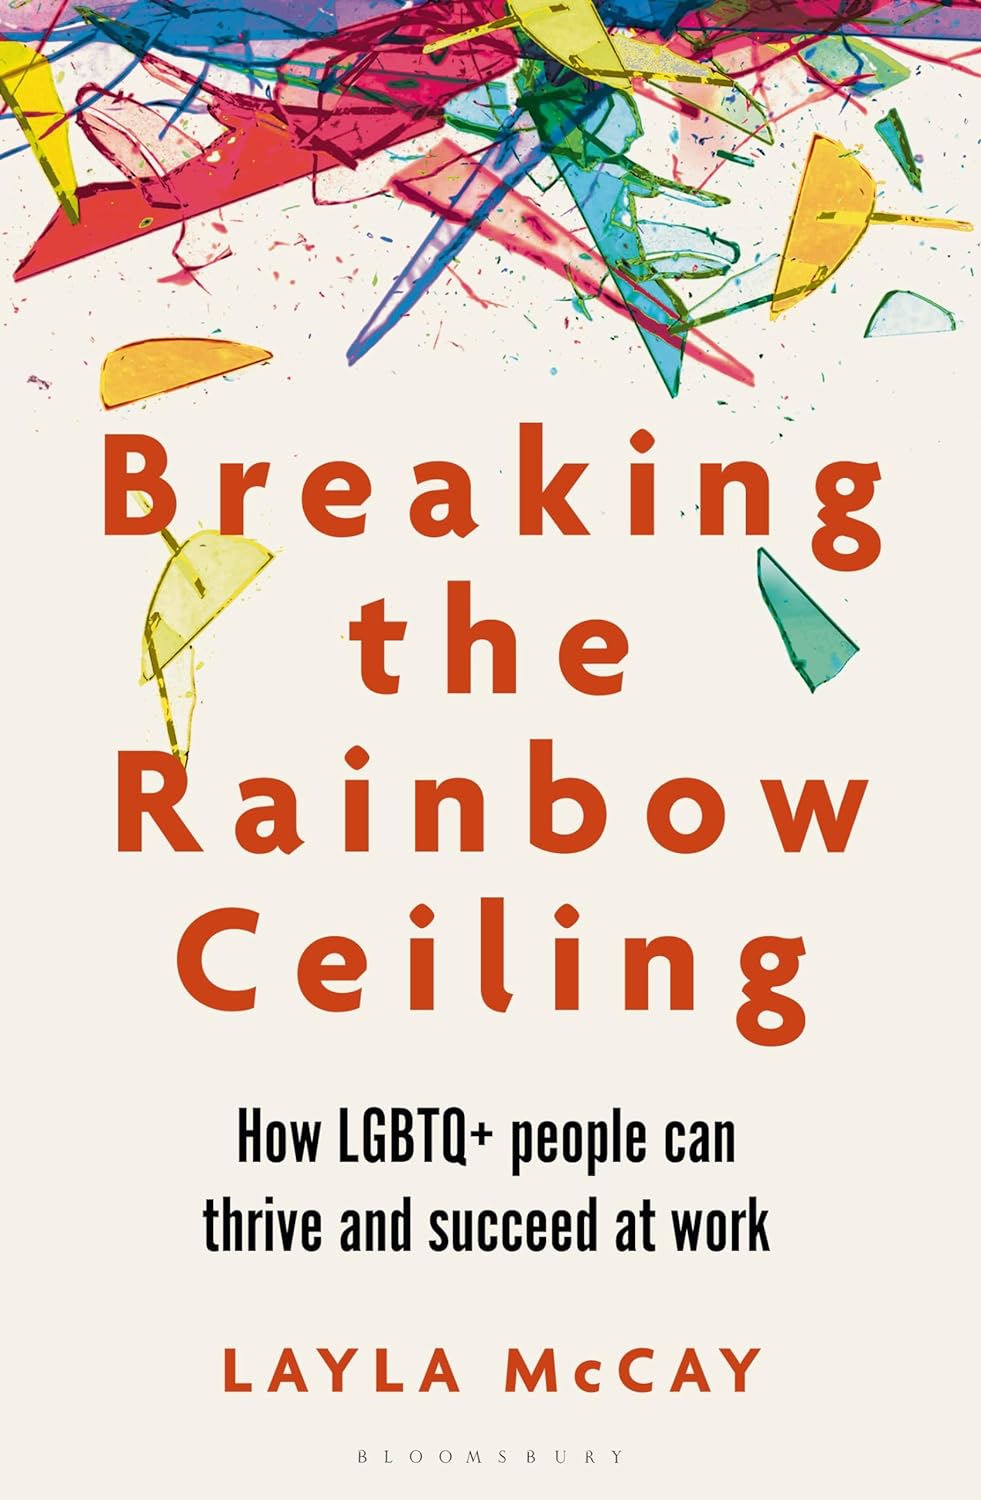 Breaking the Rainbow Ceiling: How LGBTQ+ people can thrive and succeed at work